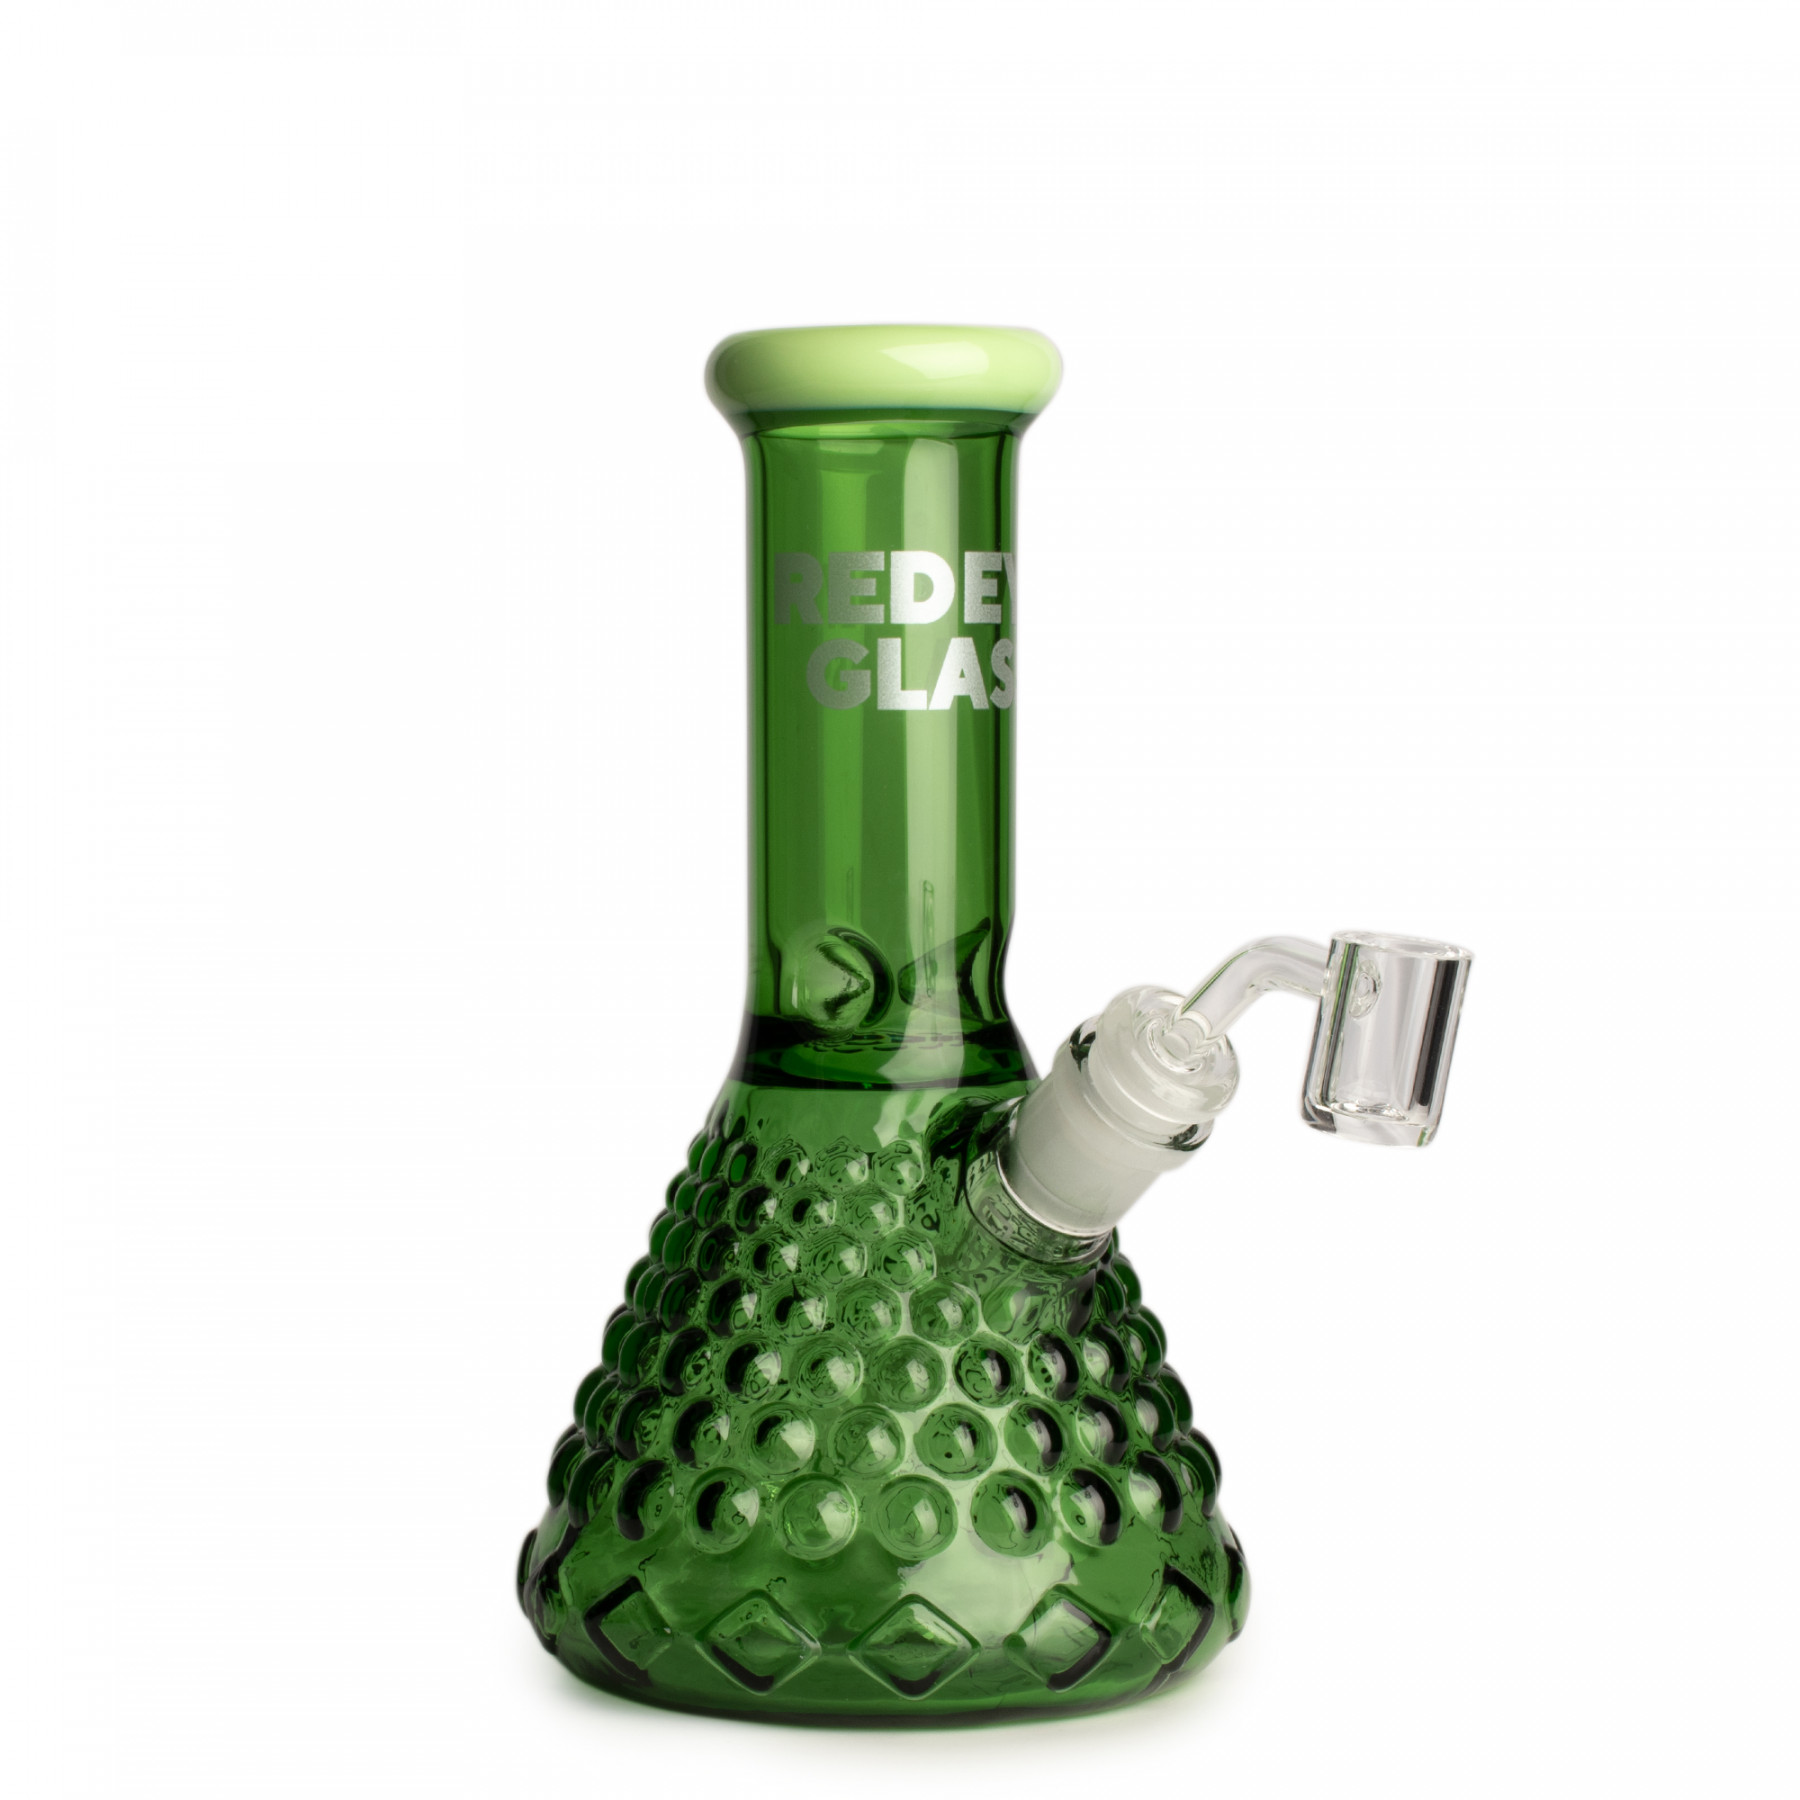 9" Ares Beaker Base Concentrate Rig